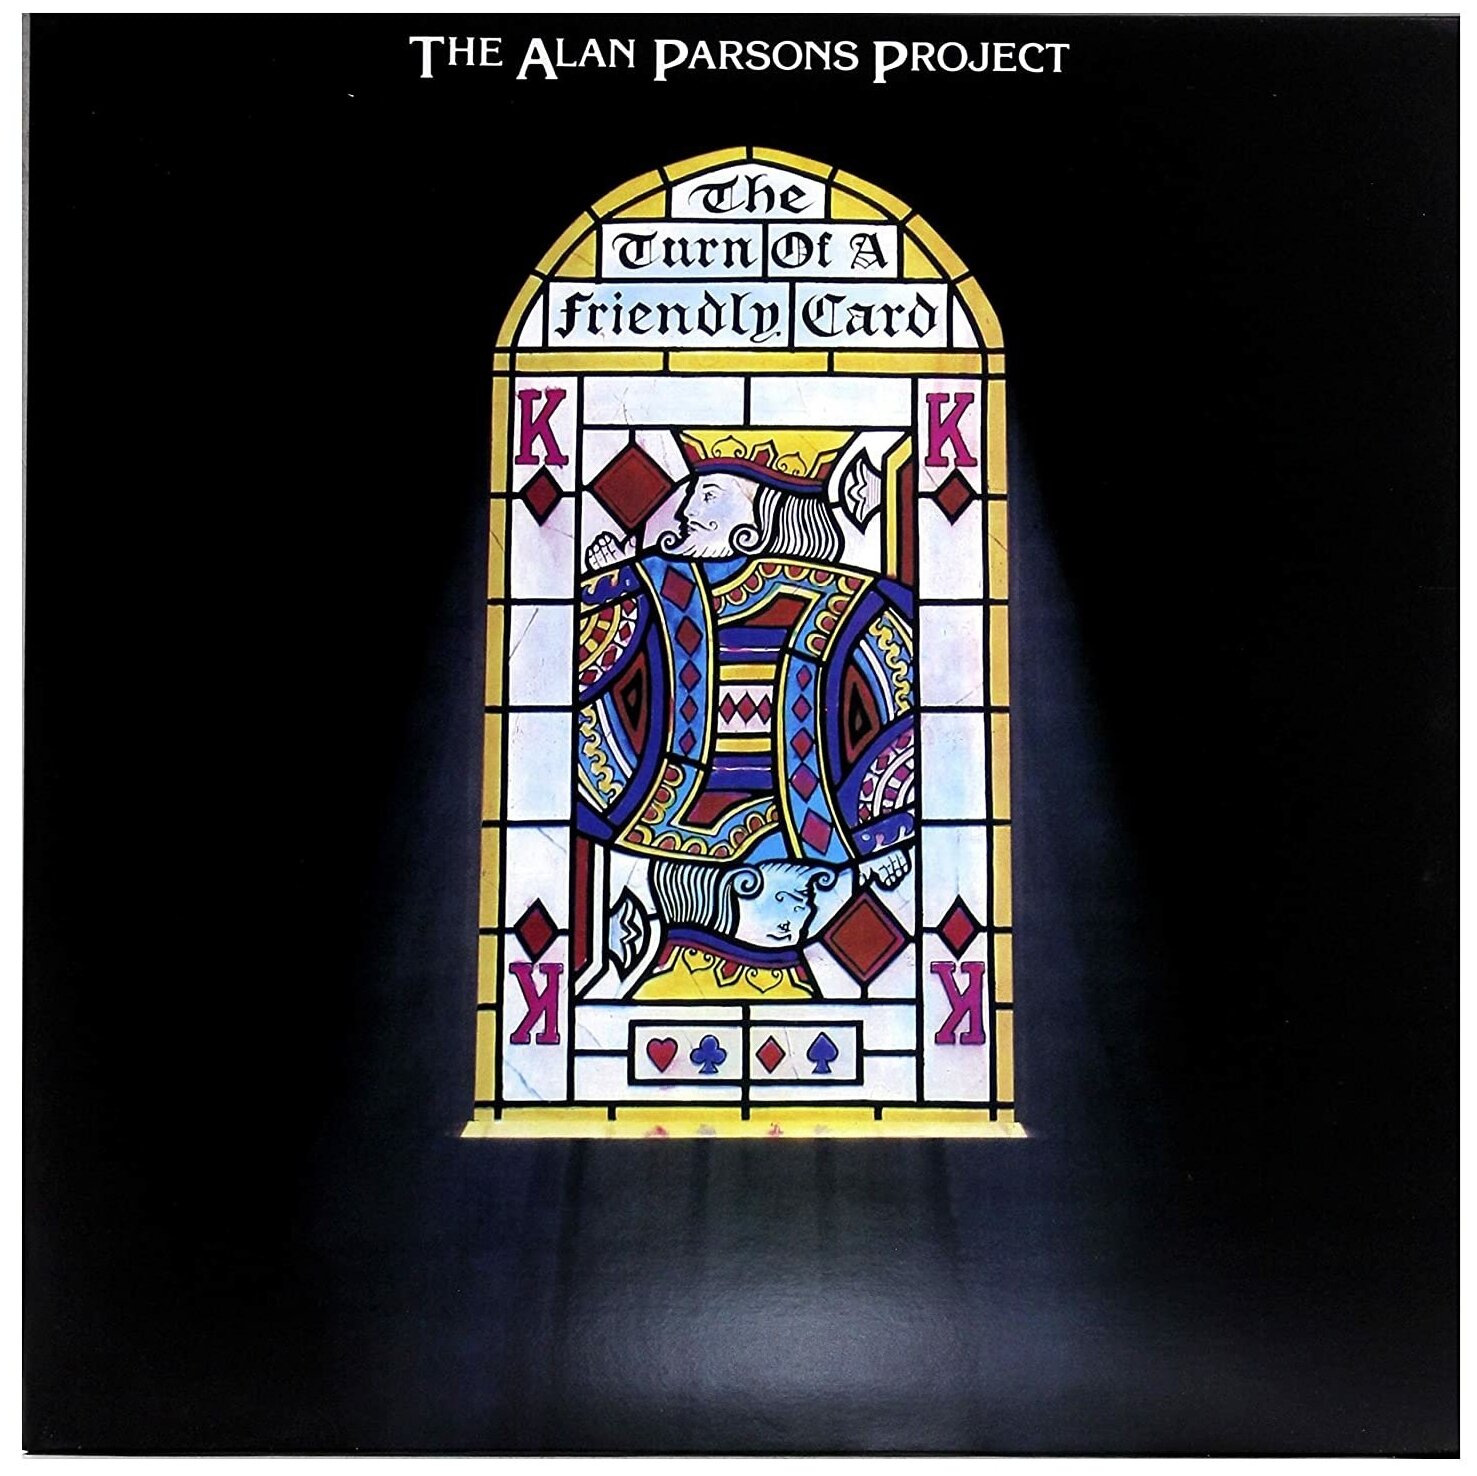 Виниловая пластинка The Alan Parsons Project. The Turn Of A Friendly Card (LP)